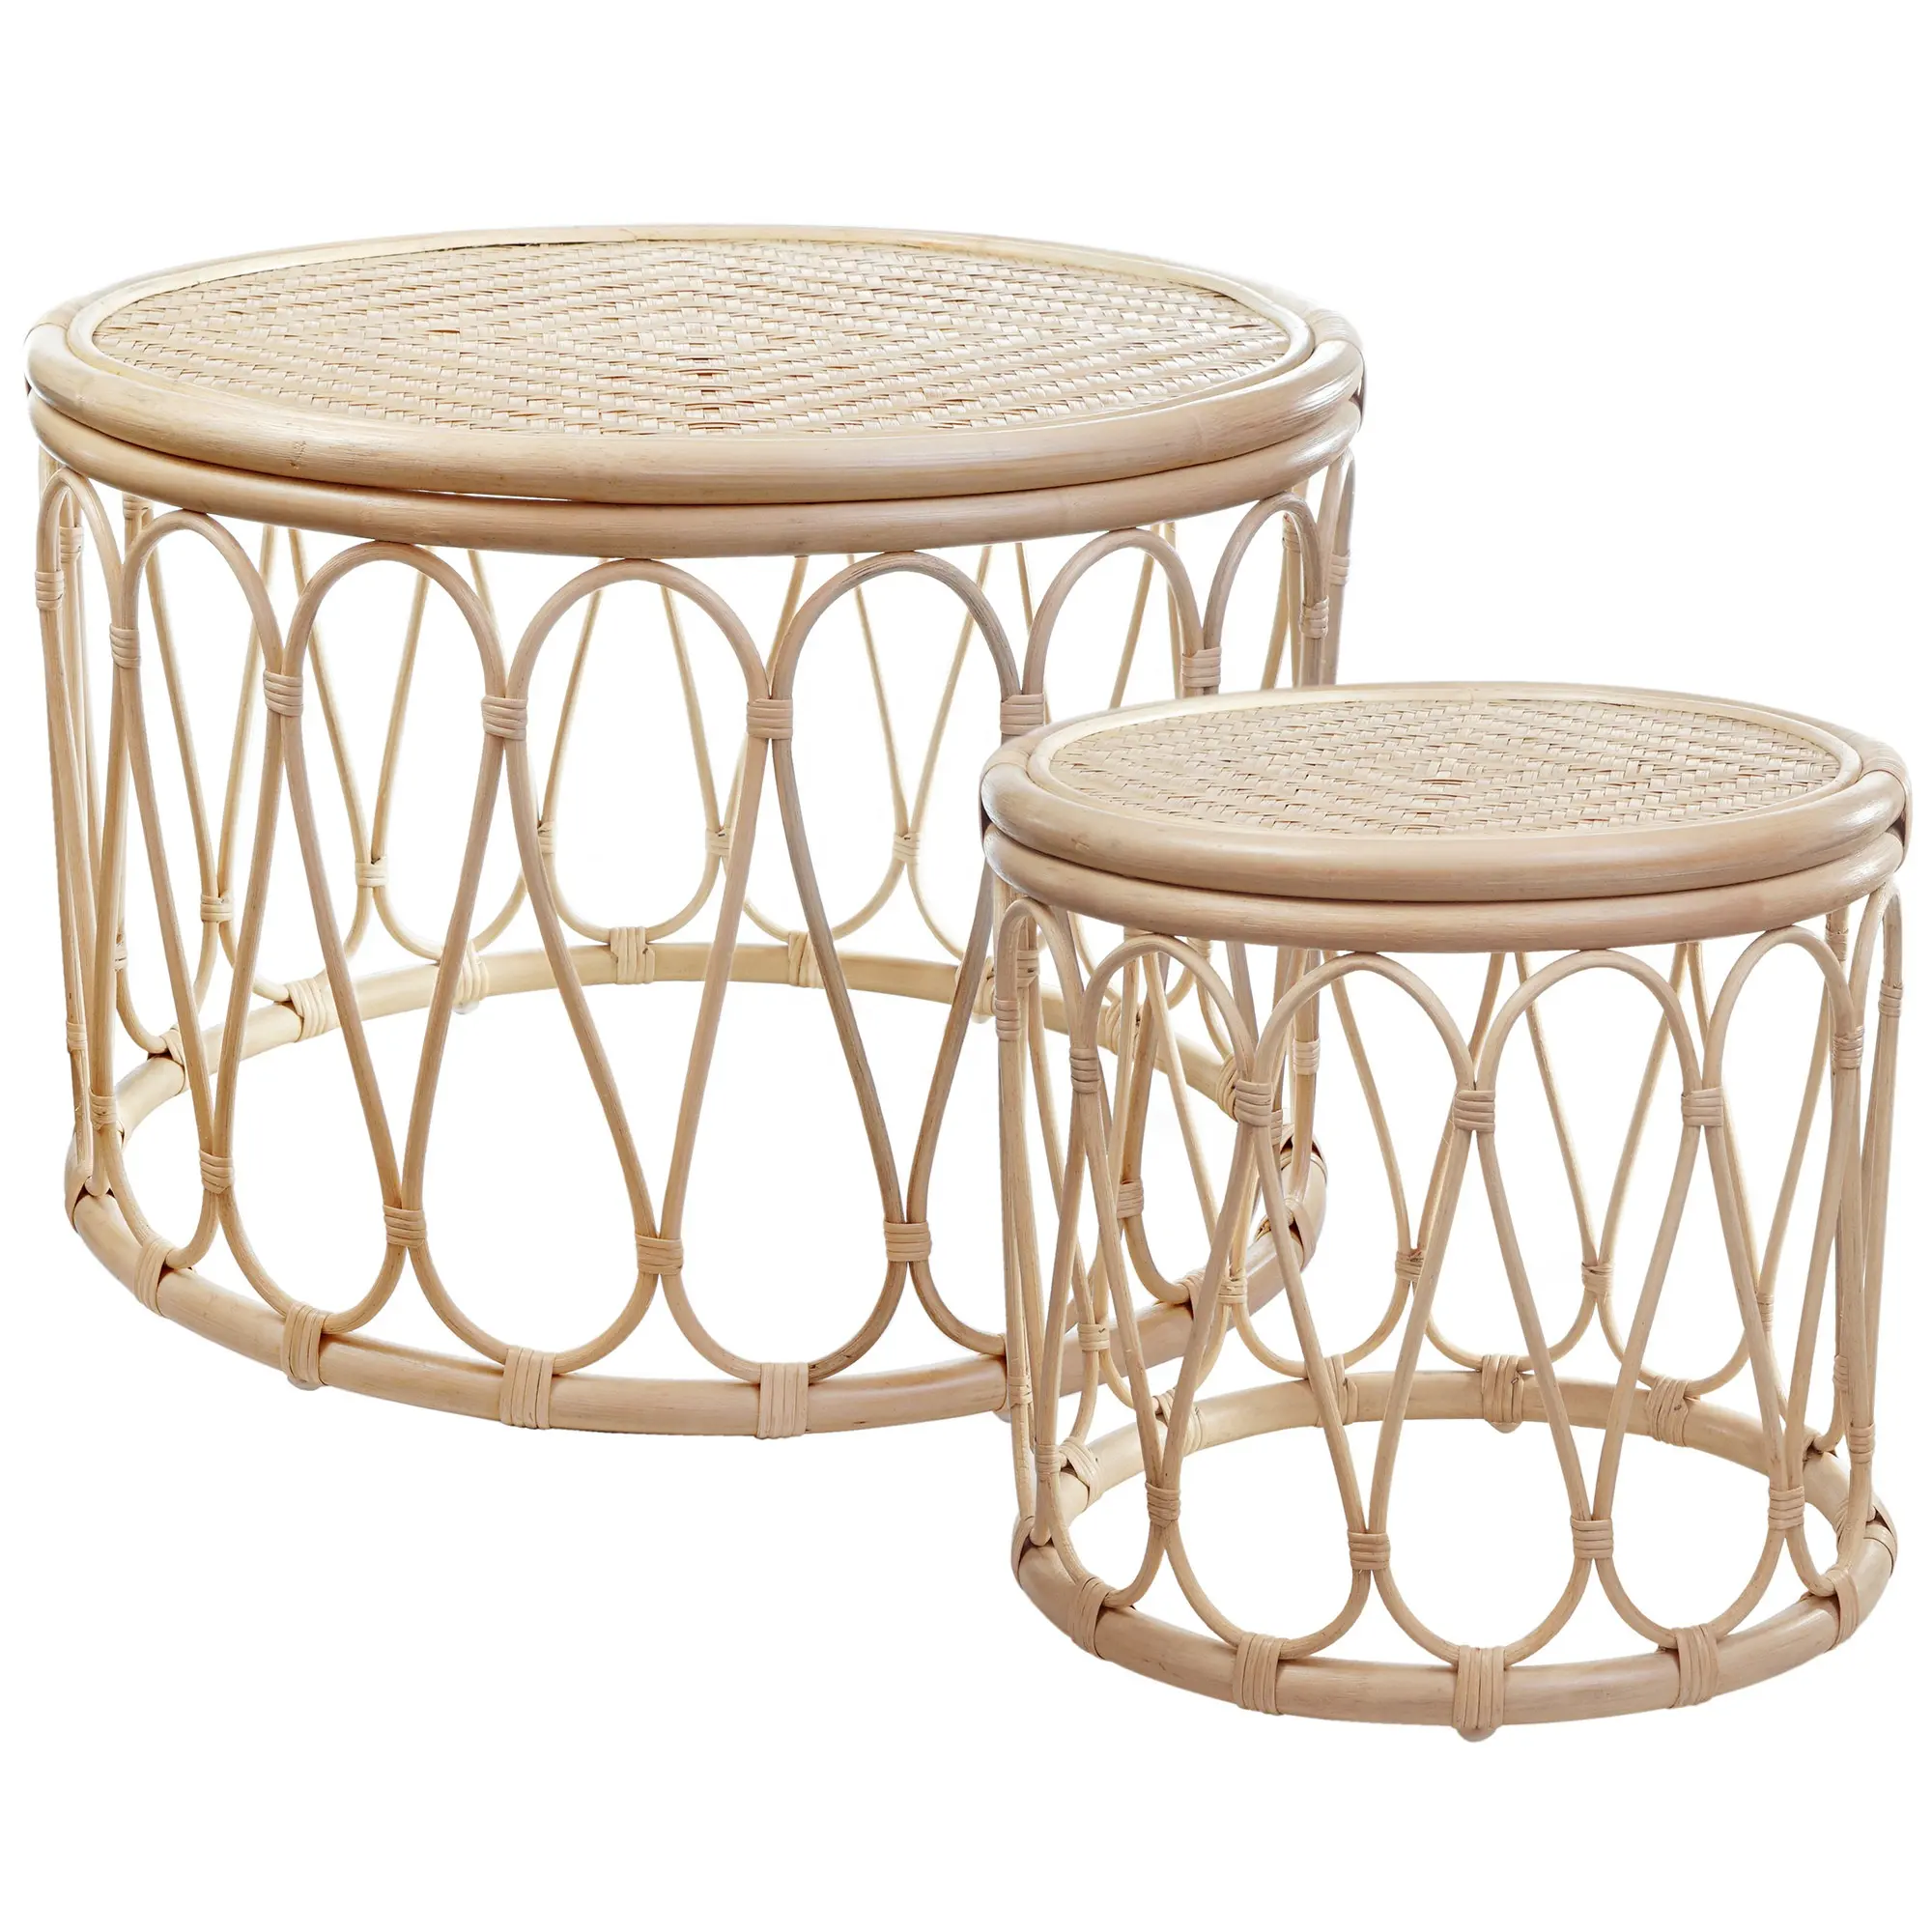 Wholesales high end living room home decor handcrafted rattan coffee table made in Vietnam